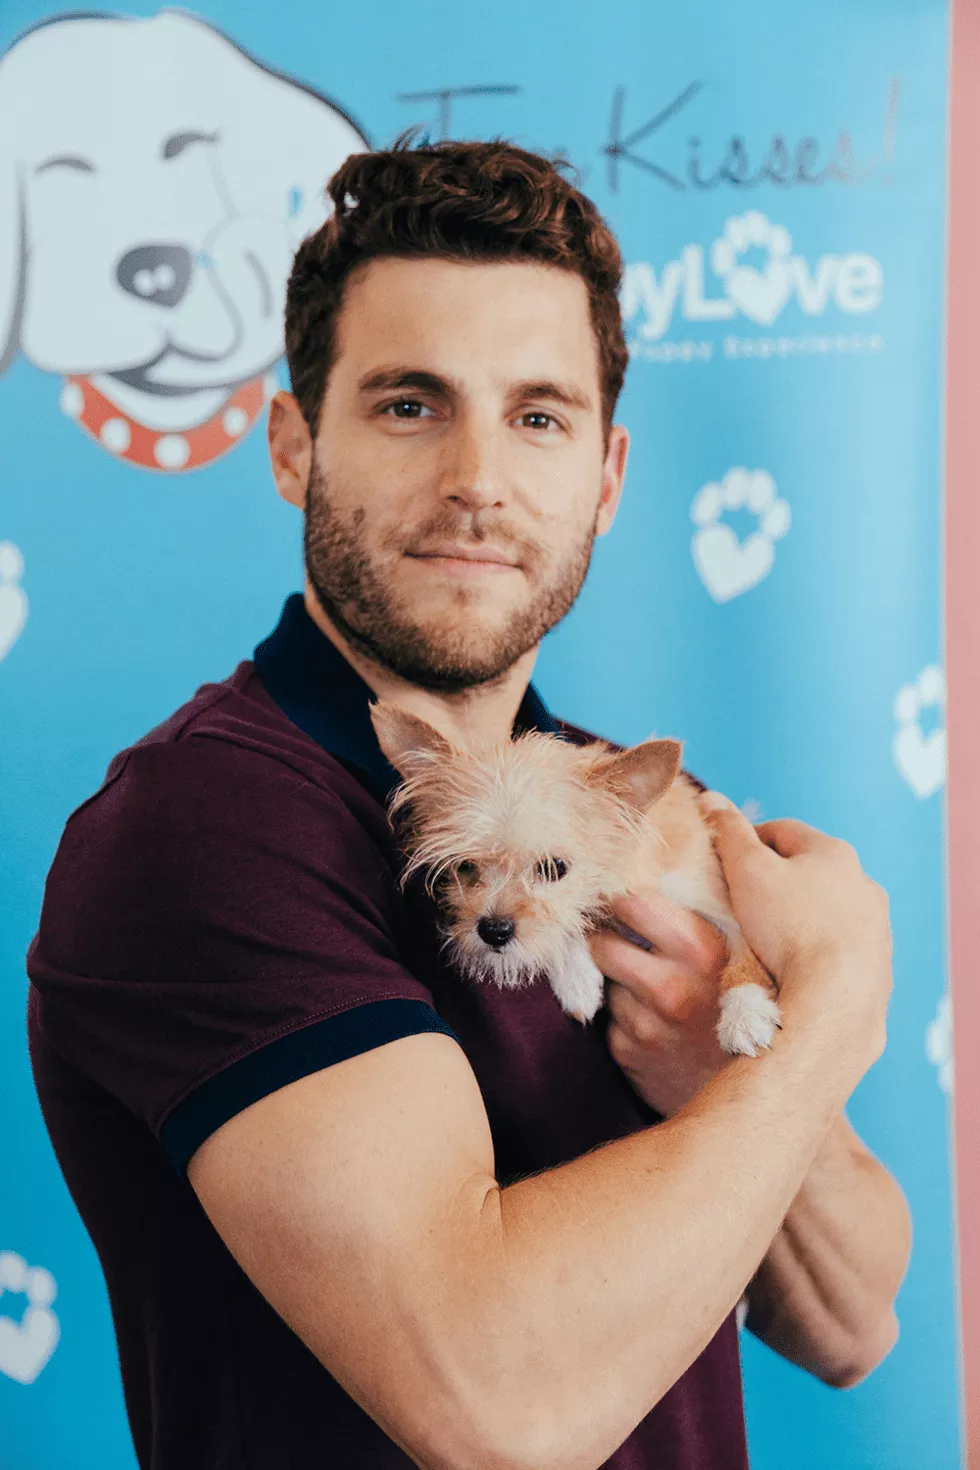 Man with a cute puppy at a experience with Puppy Love.